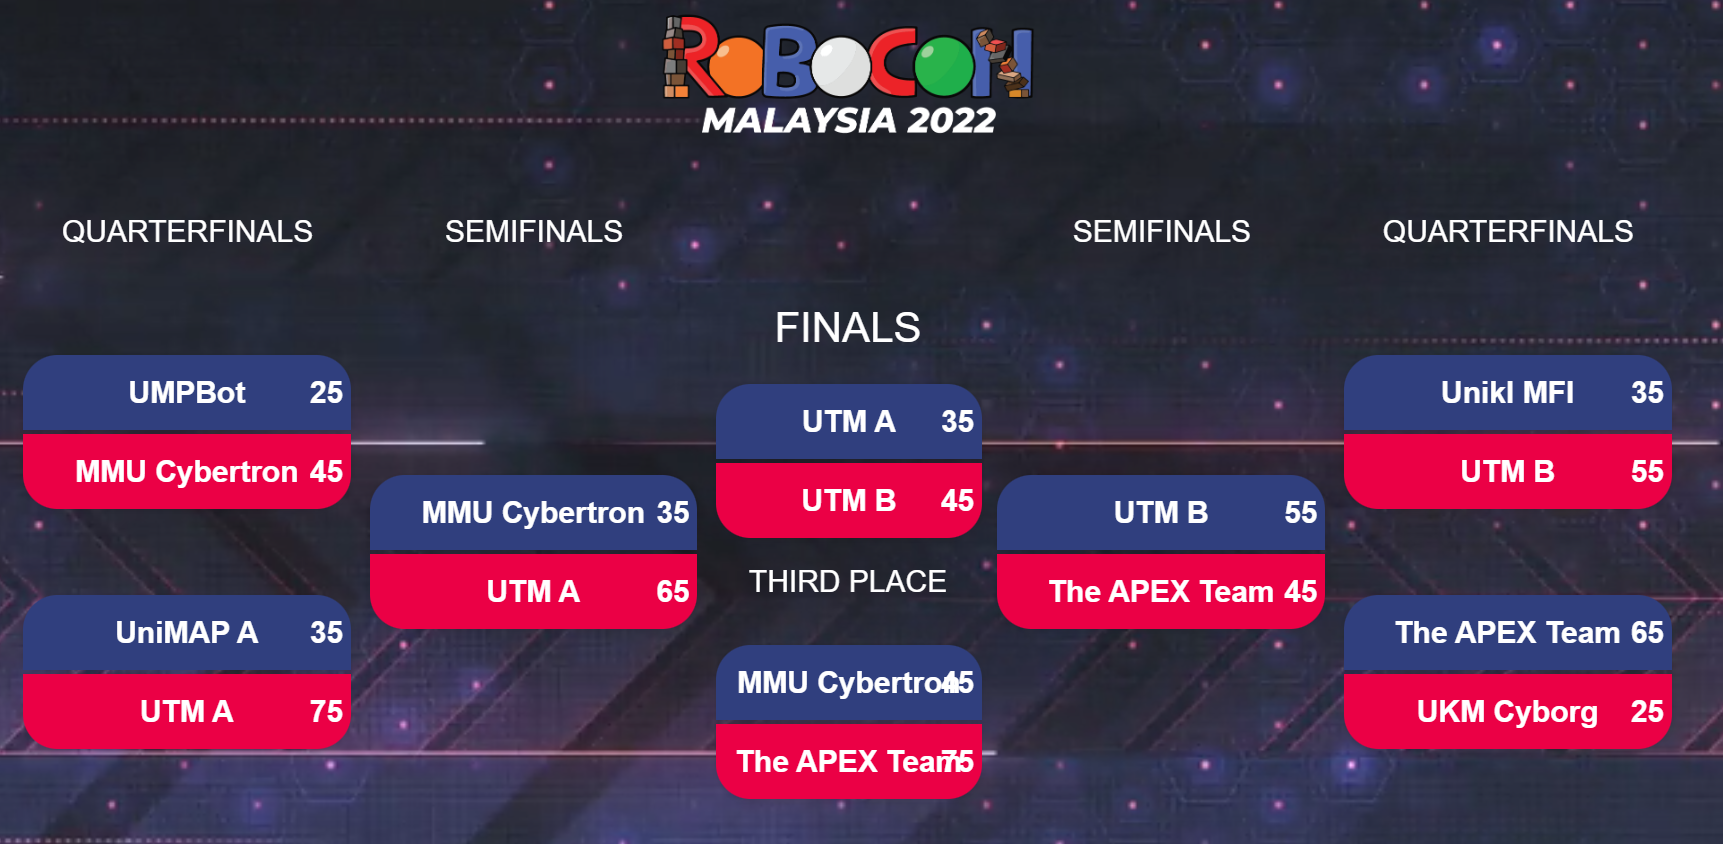 https://roboconmalaysia.com/wp-content/uploads/2022/06/playoff.png